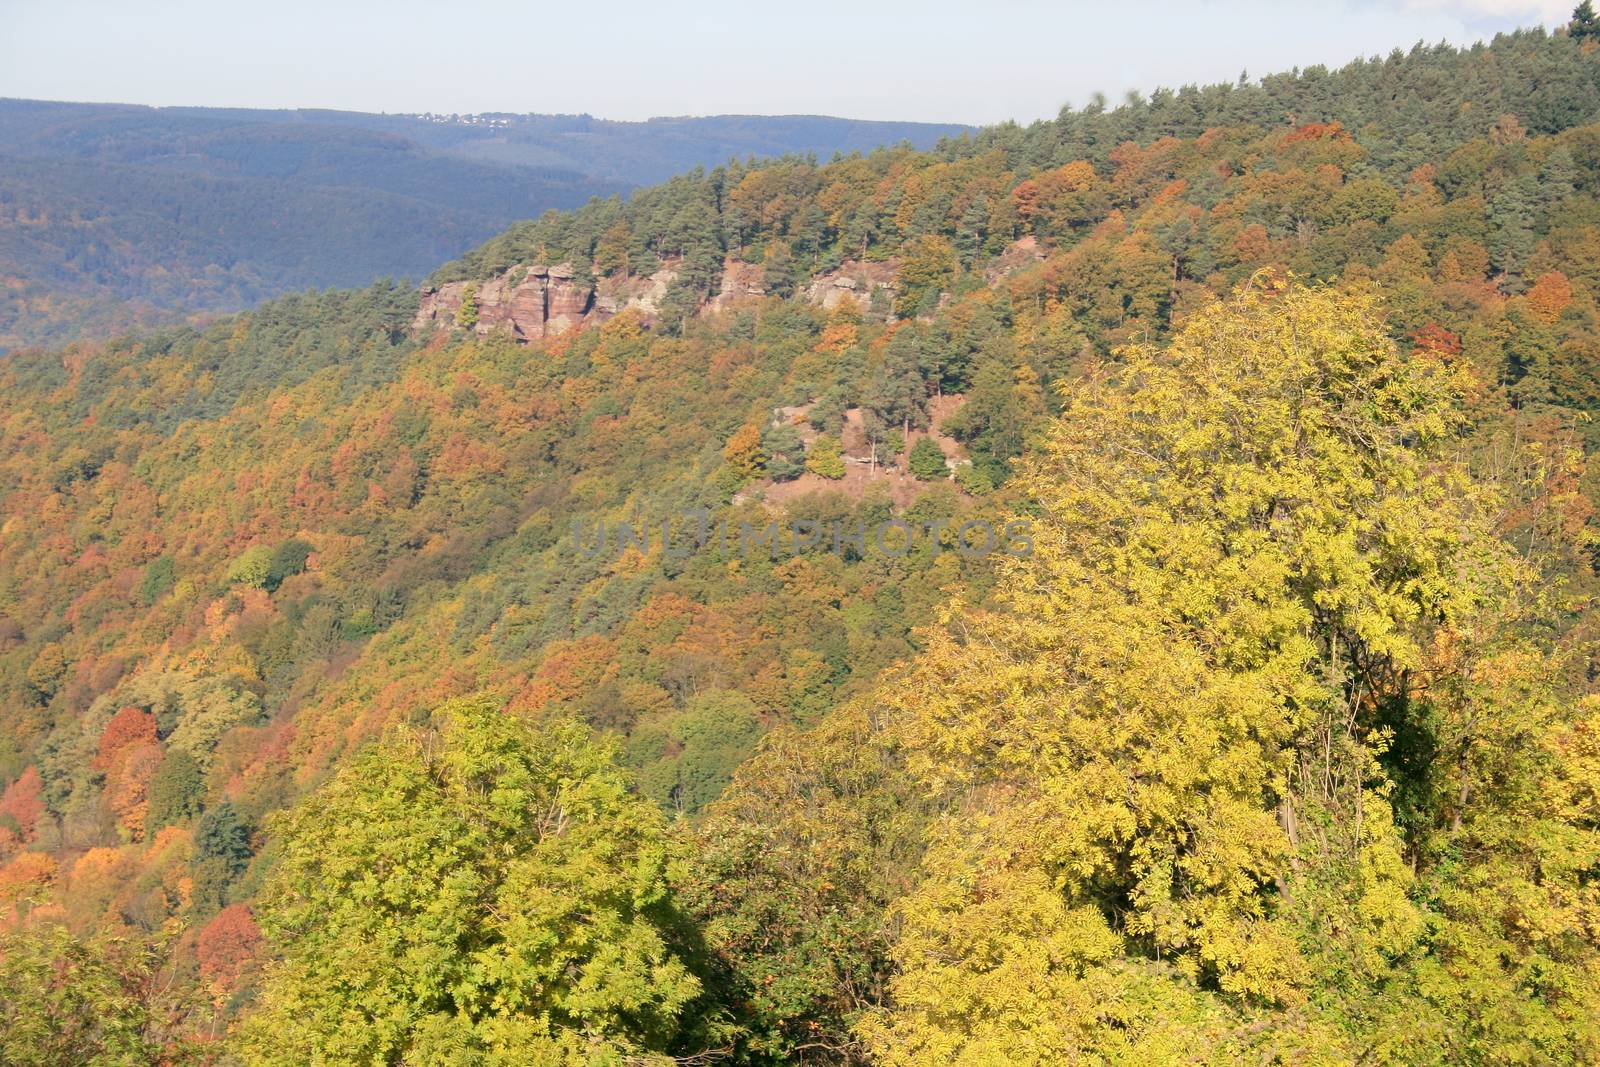 An autumn mountain landscape with forest and rocks